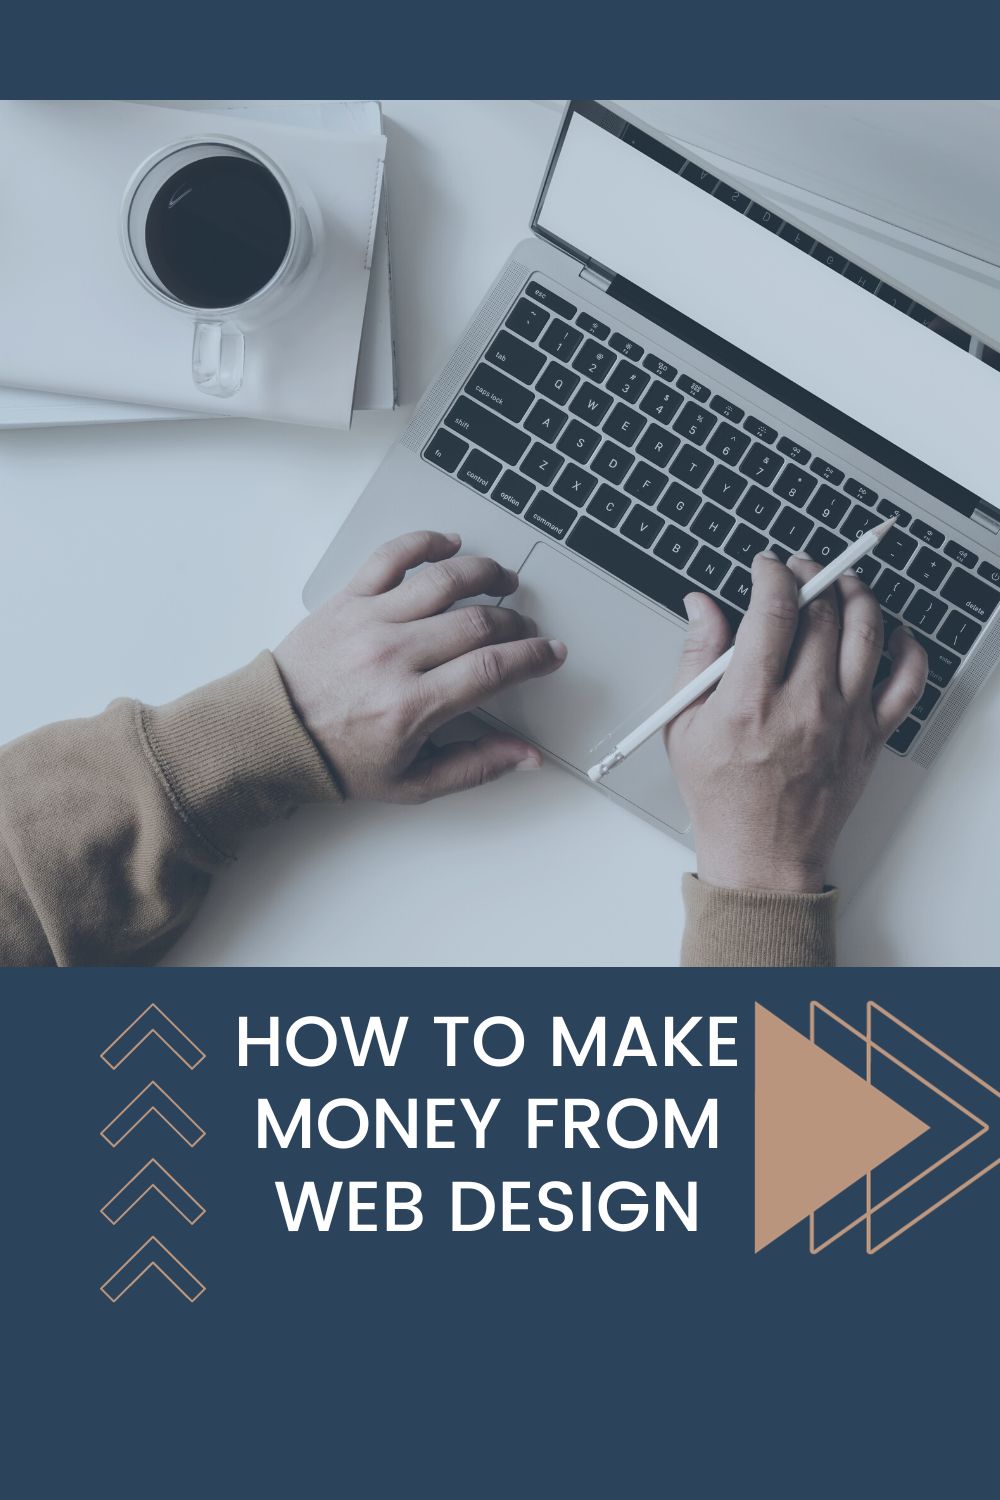 How to Make Money from Web Design